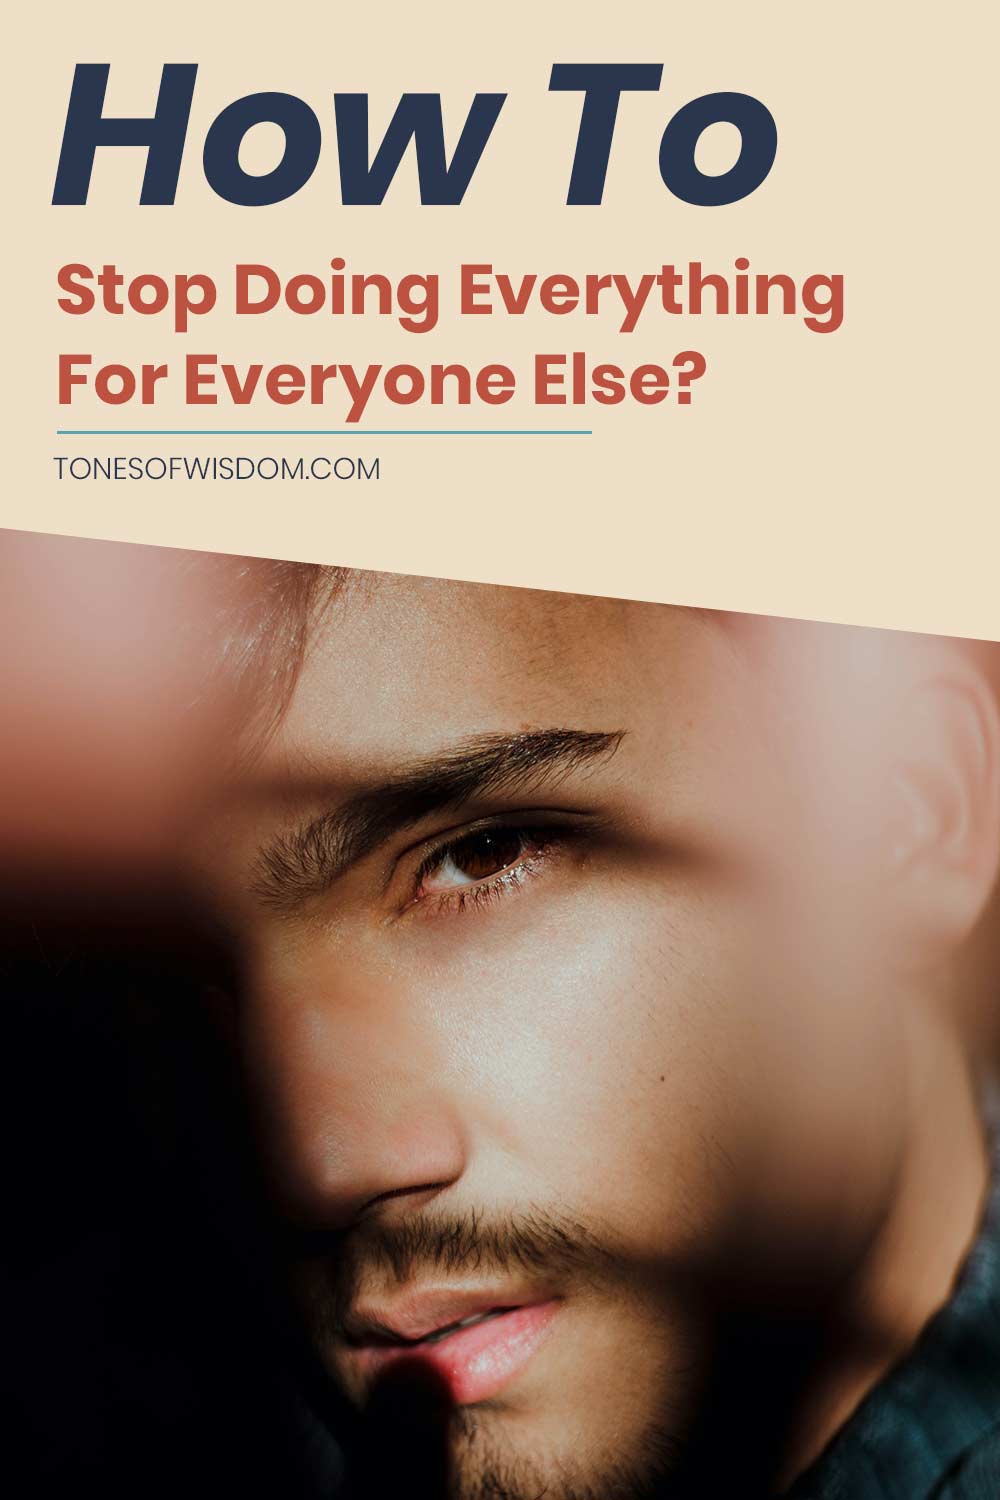 Sunlight falling on a man's face - How To Stop Doing Everything For Everyone Else?